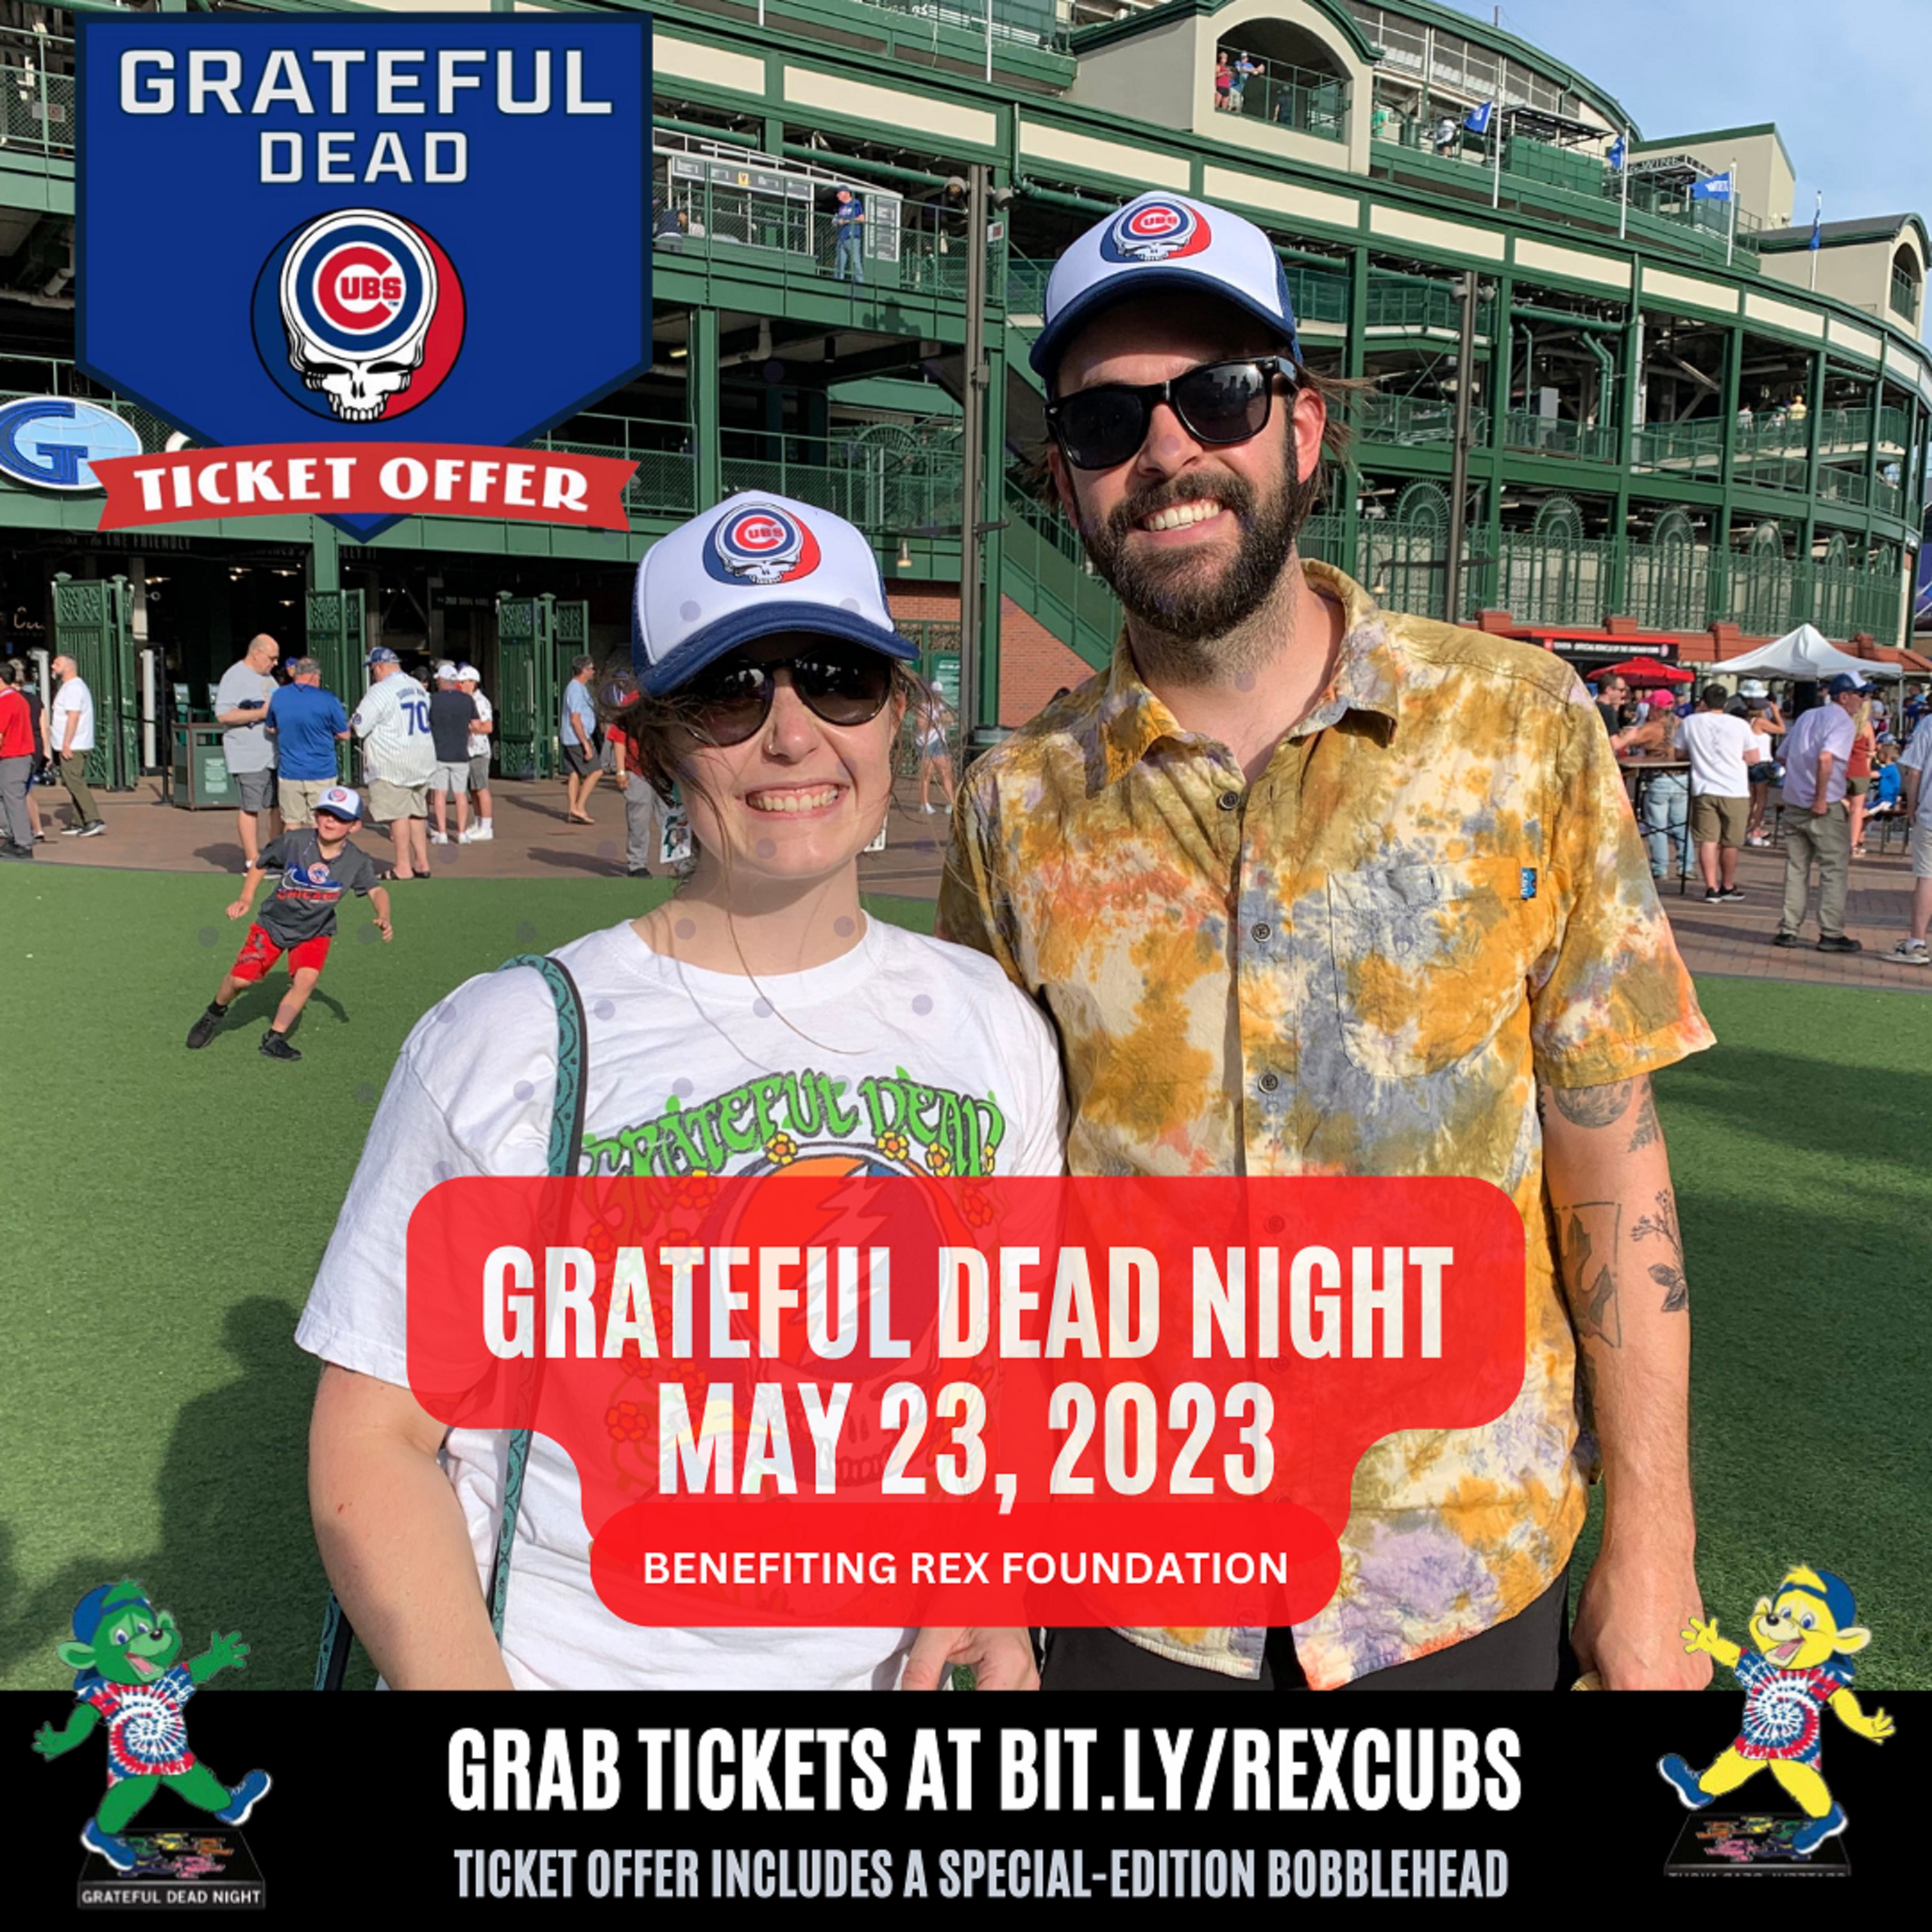 Join Rex Foundation for Cubs Grateful Dead Night on May 23rd, 2023! 